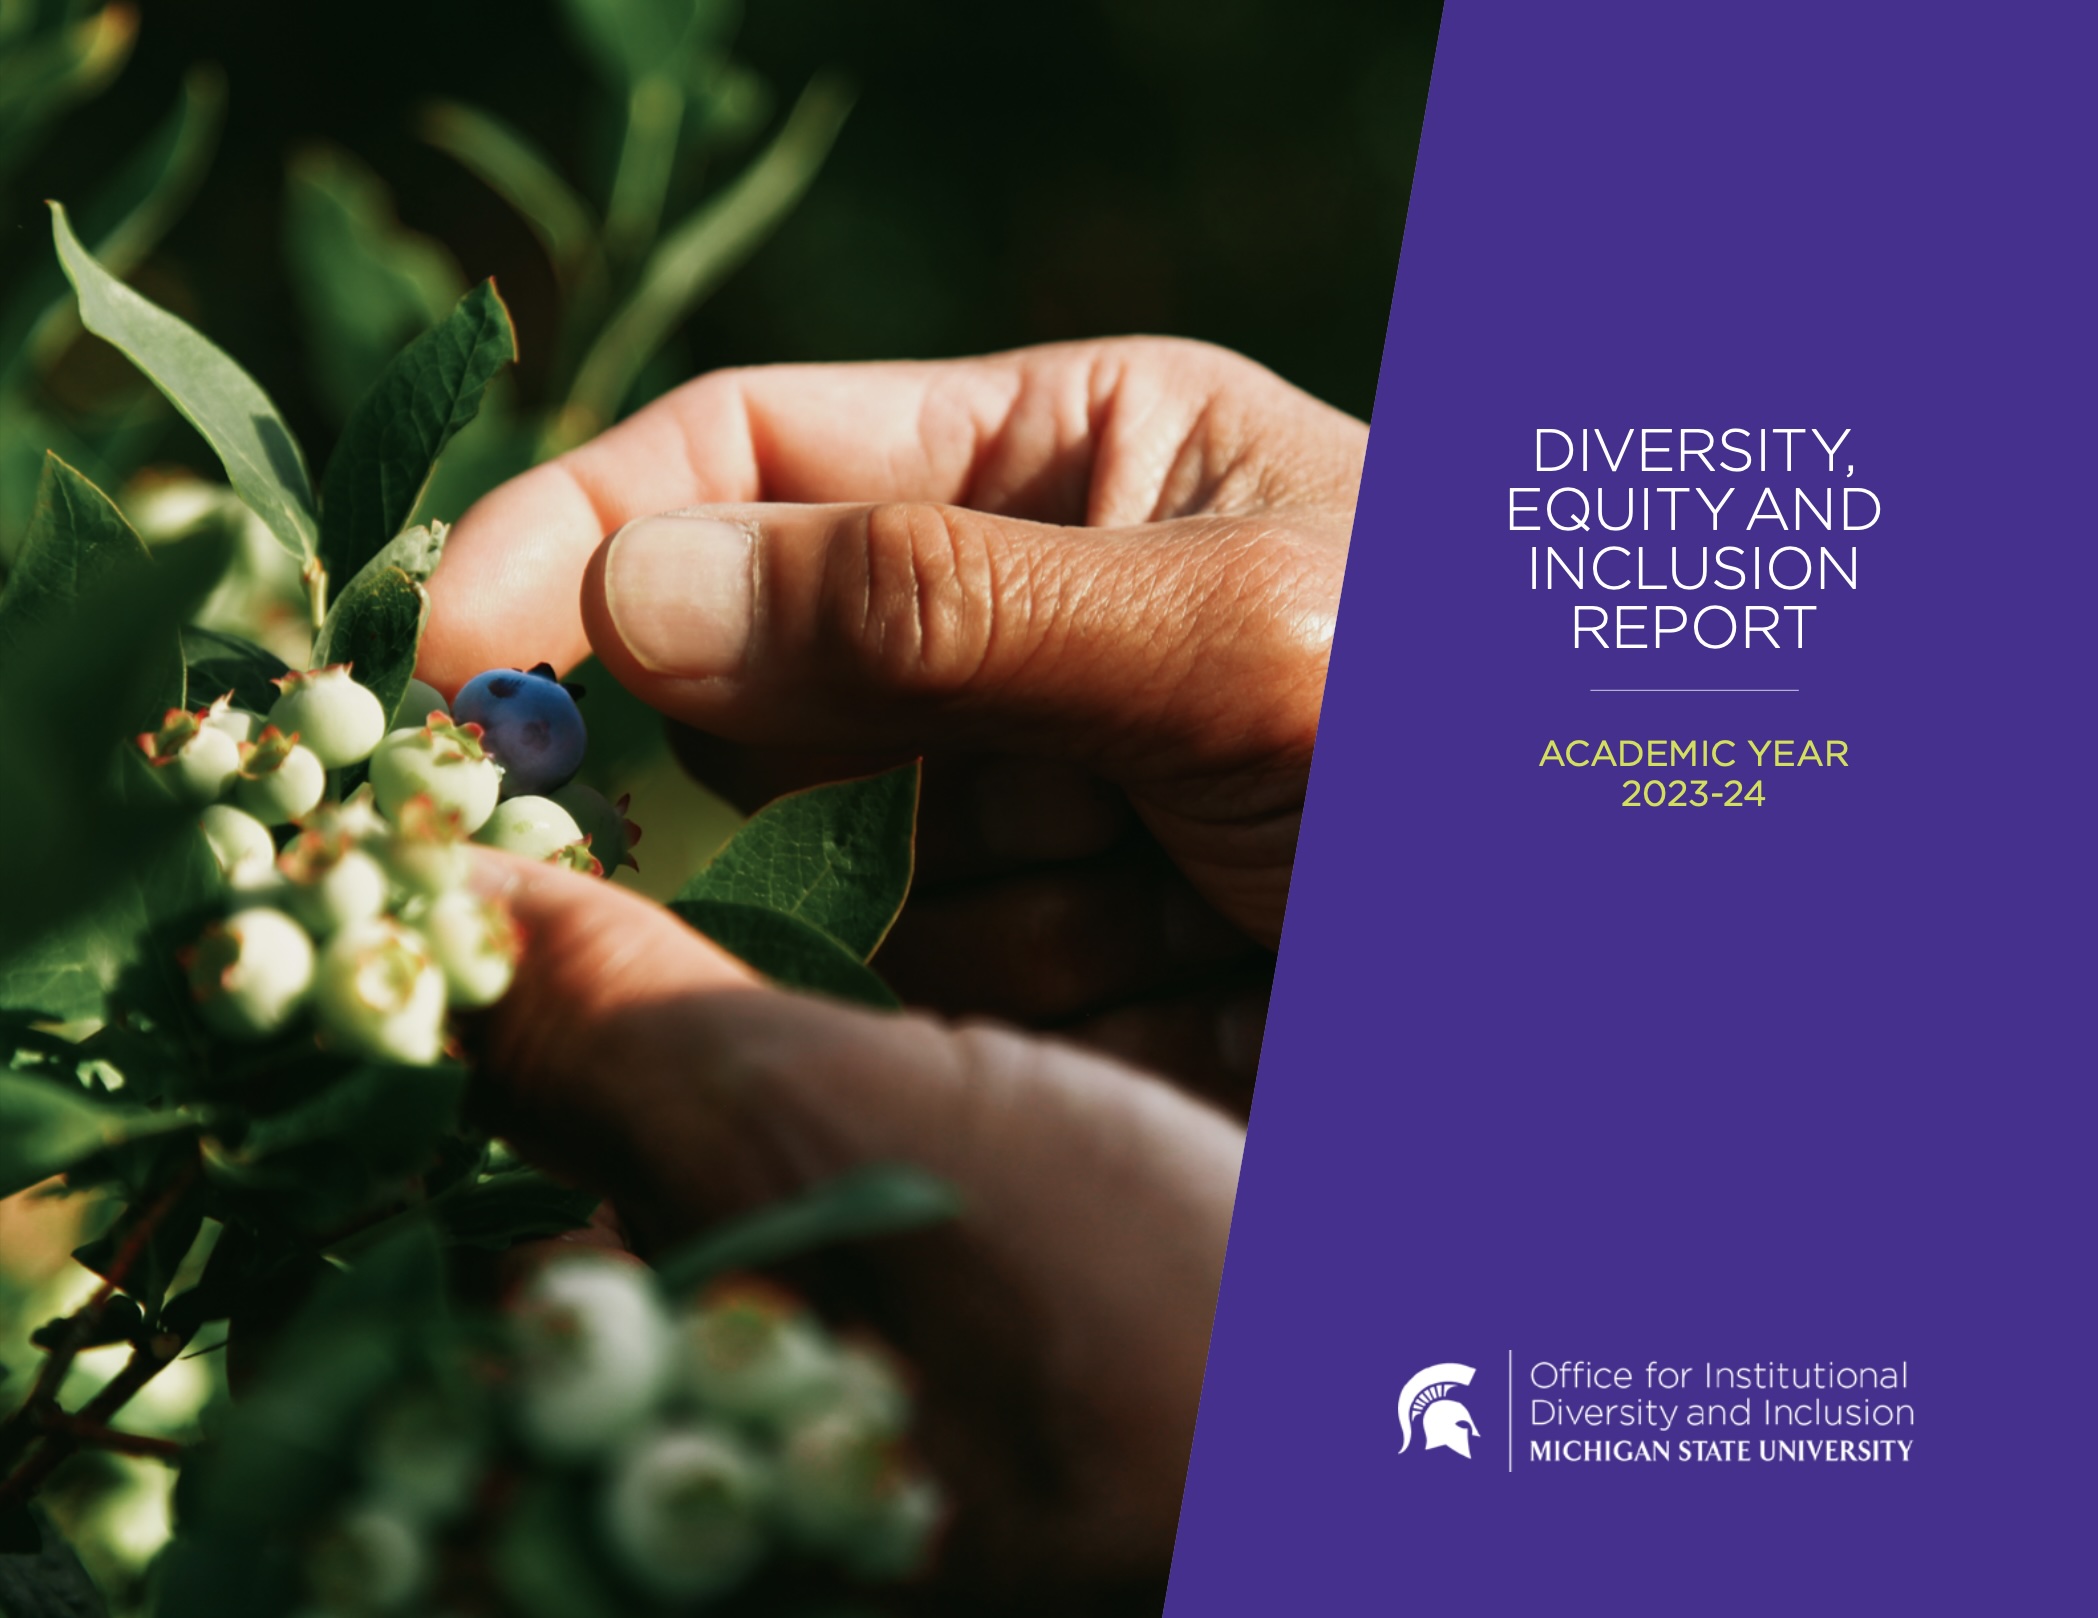 MSU 2023-24 Diversity, Equity and Inclusion Reporthttps://inclusion.msu.edu/_assets/documents/about/annual-reports/2022-23-MSU-Diversity-Equity-Inclusion-Report.pdf